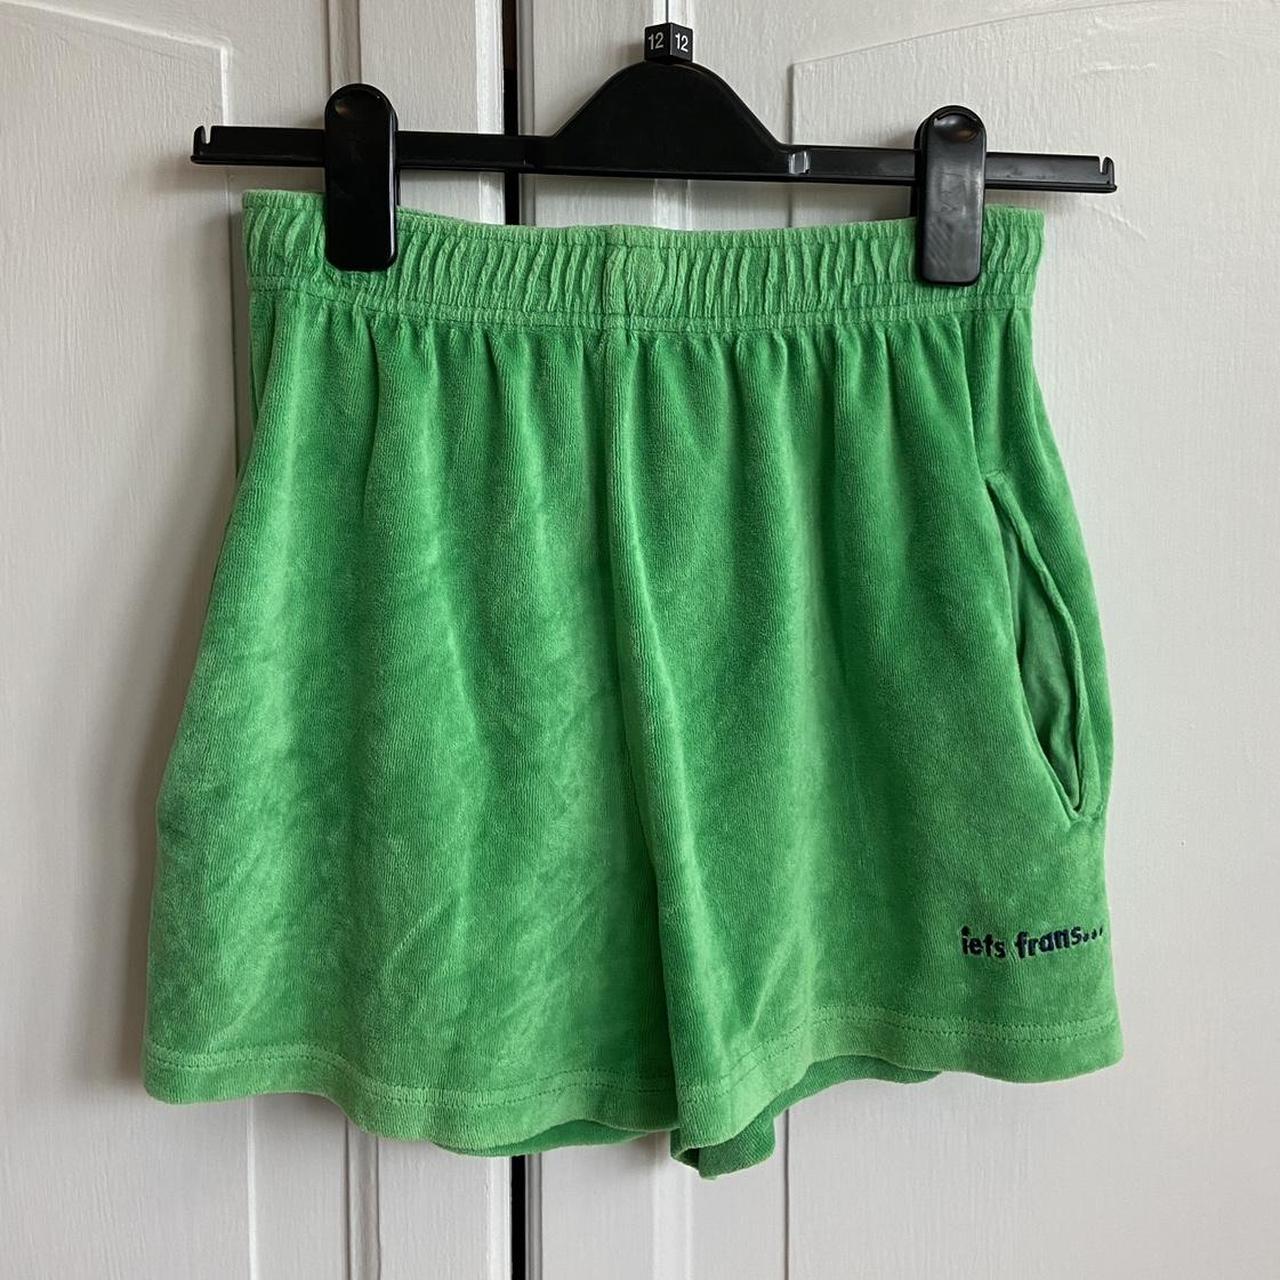 URBAN OUTFITTERS IETS FRANS BRIGHT GREEN SHORTS SIZE... - Depop